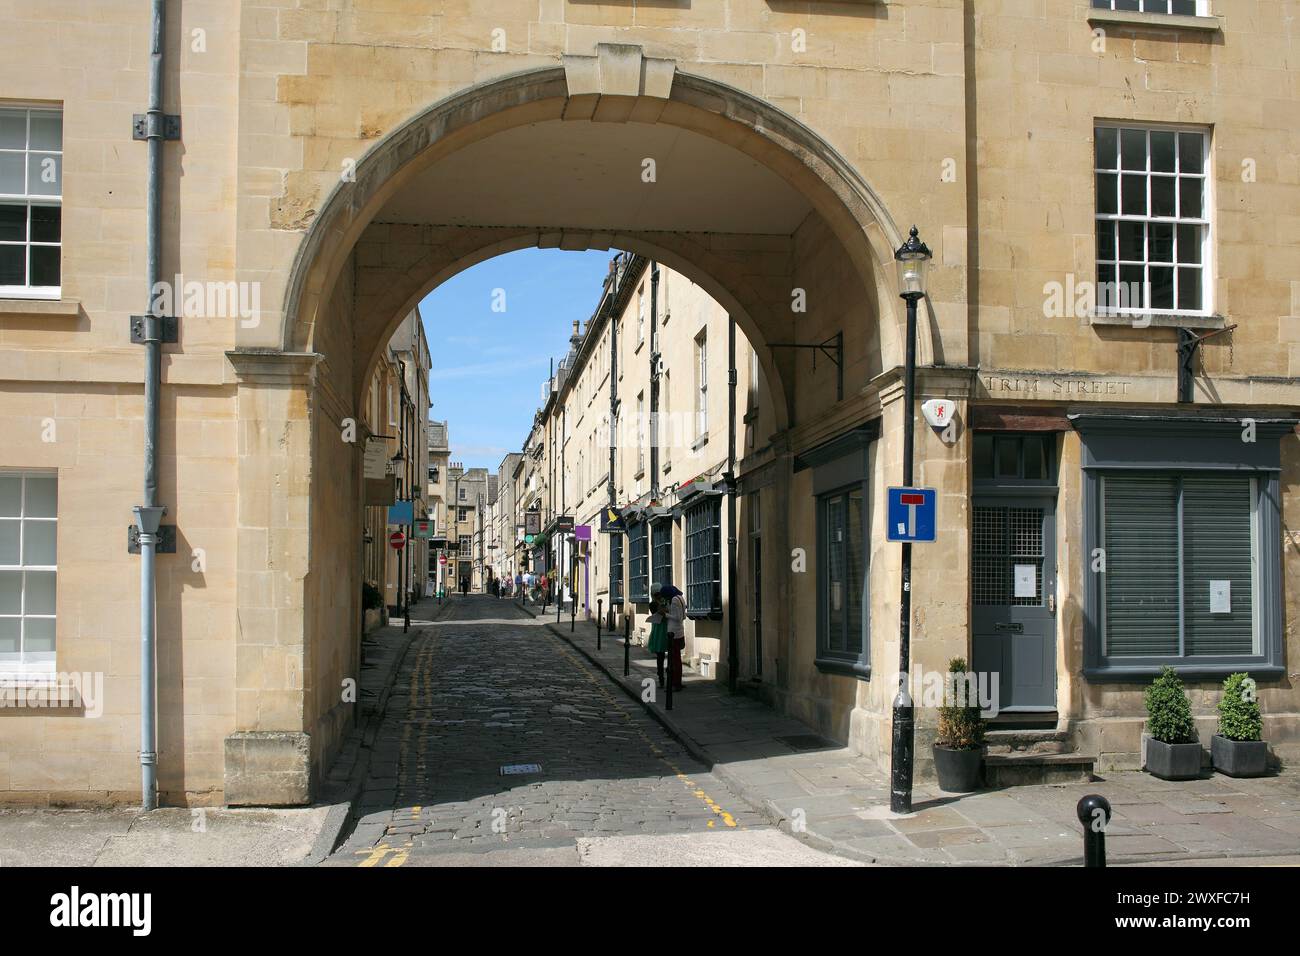 Queen St, Bath, as seen through an archway on Trim St. Stock Photo